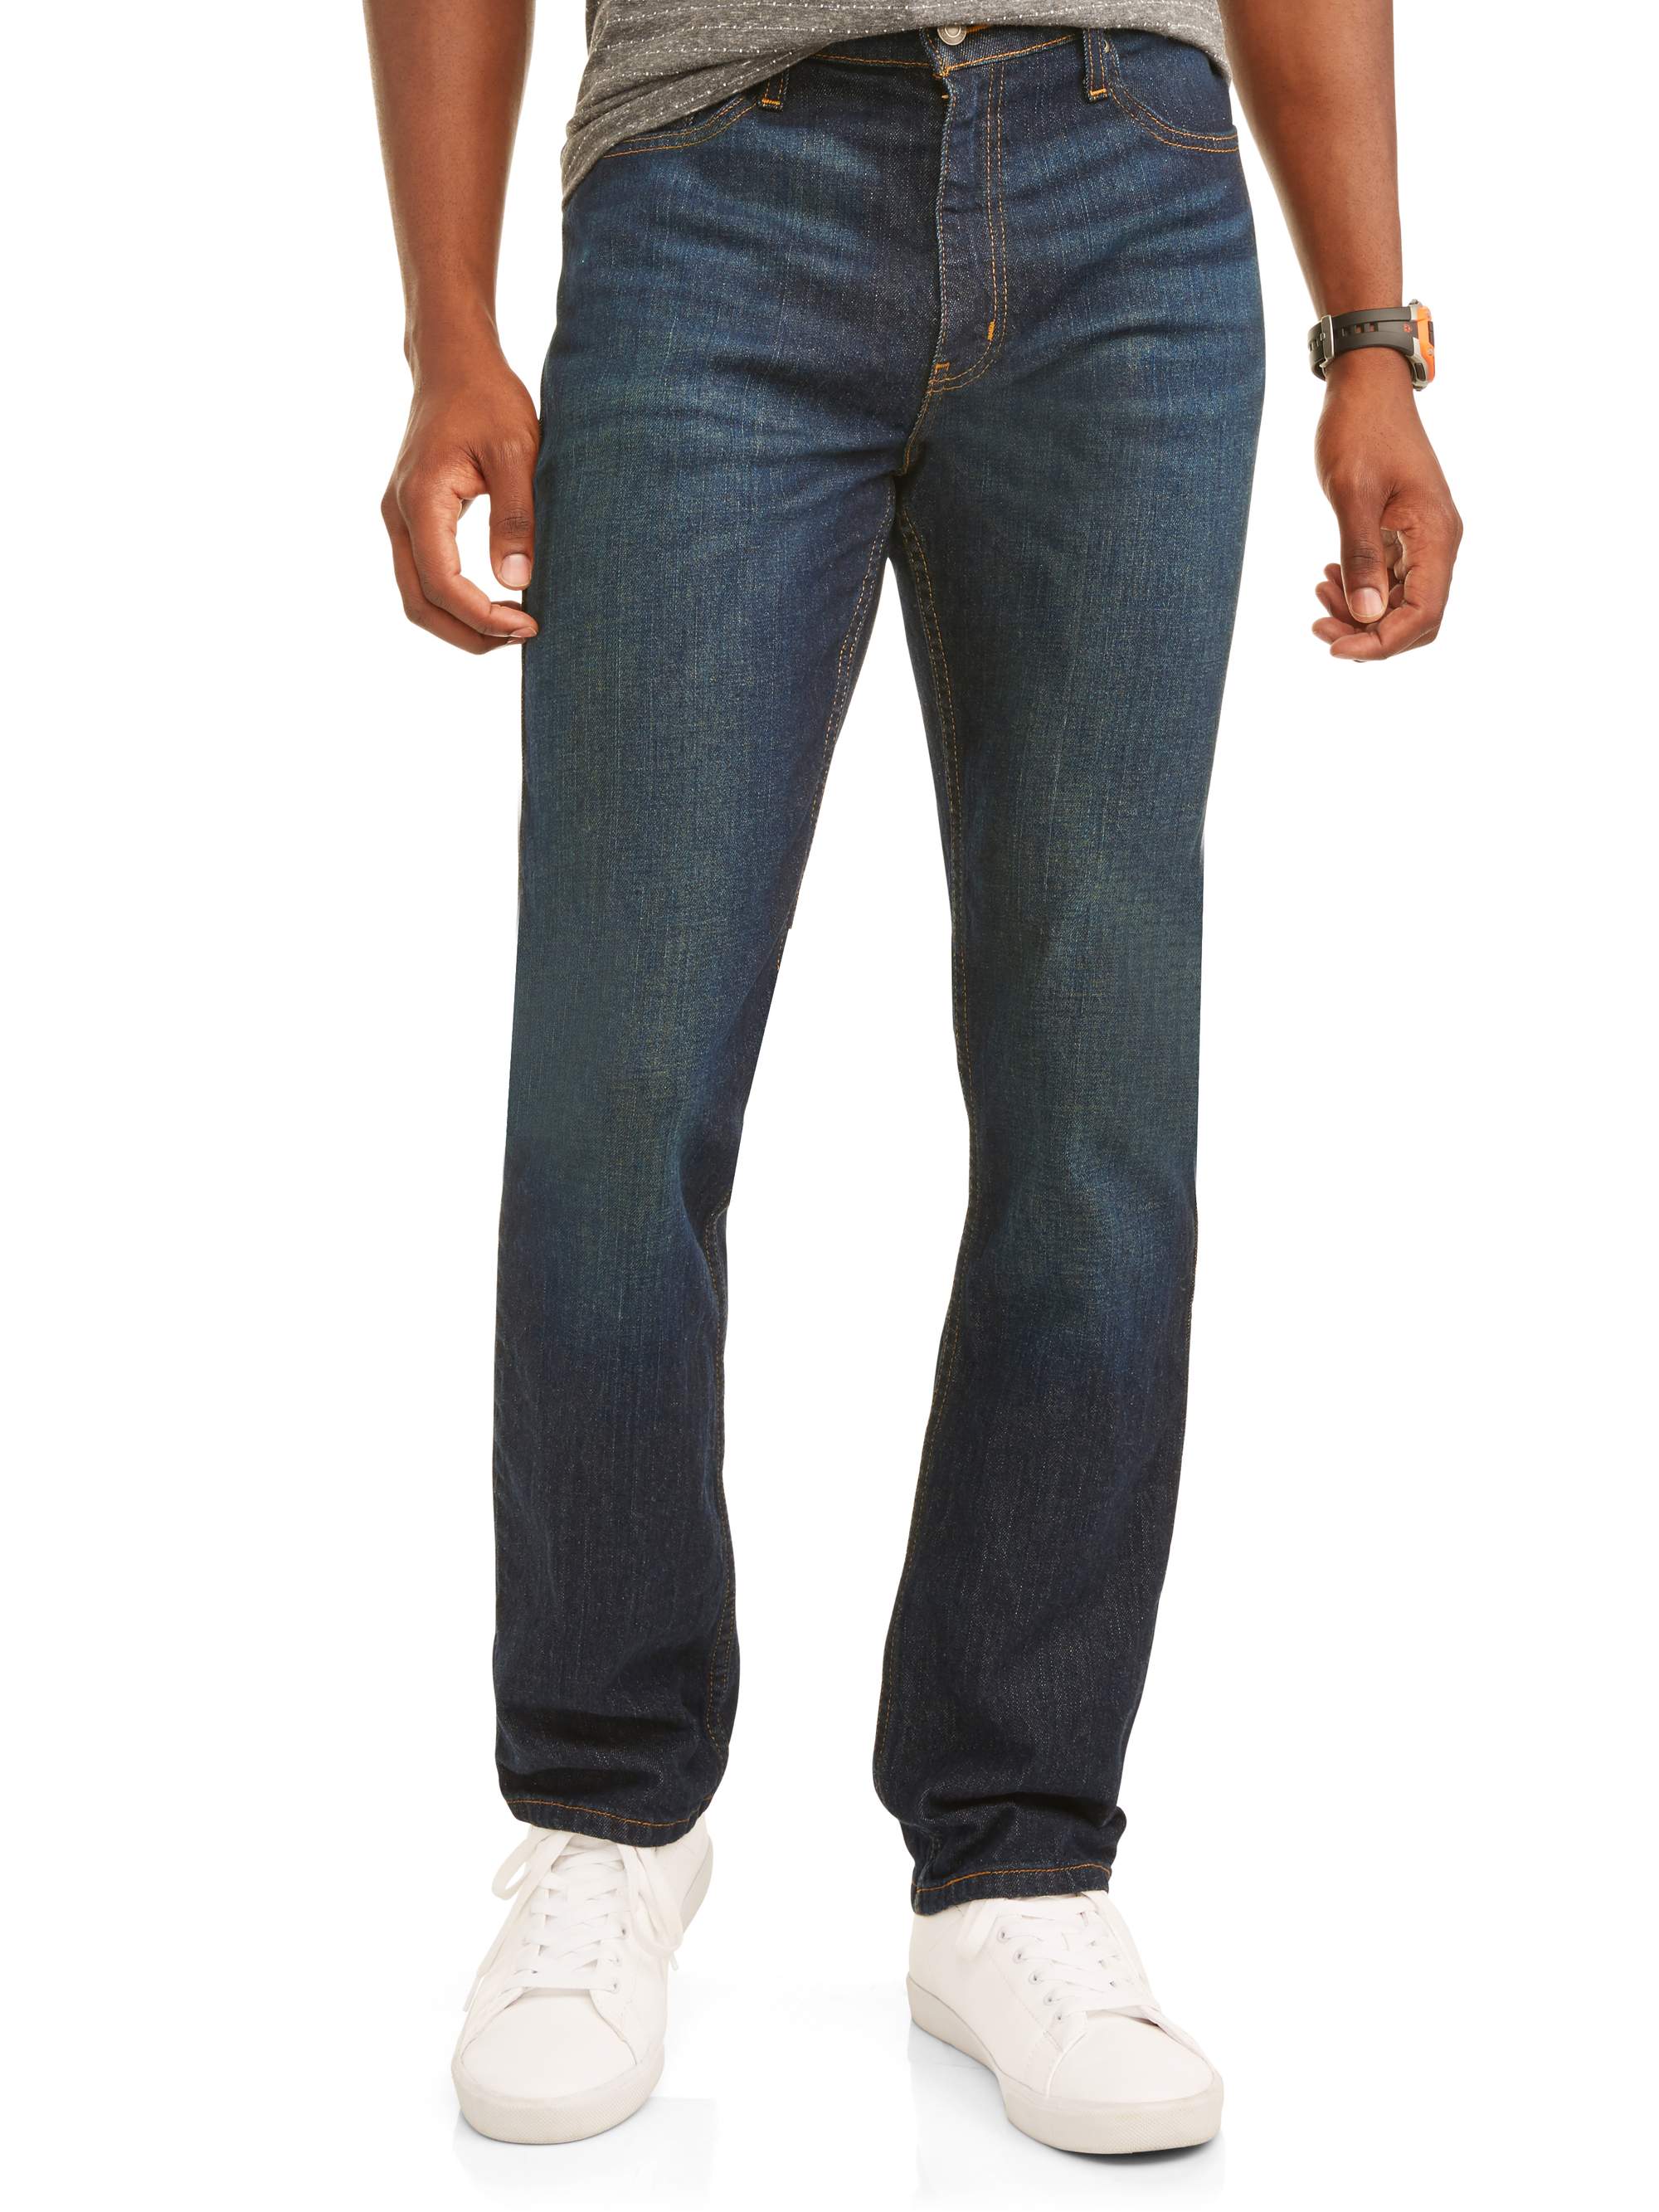 George Men's Straight Fit Jeans - image 1 of 5